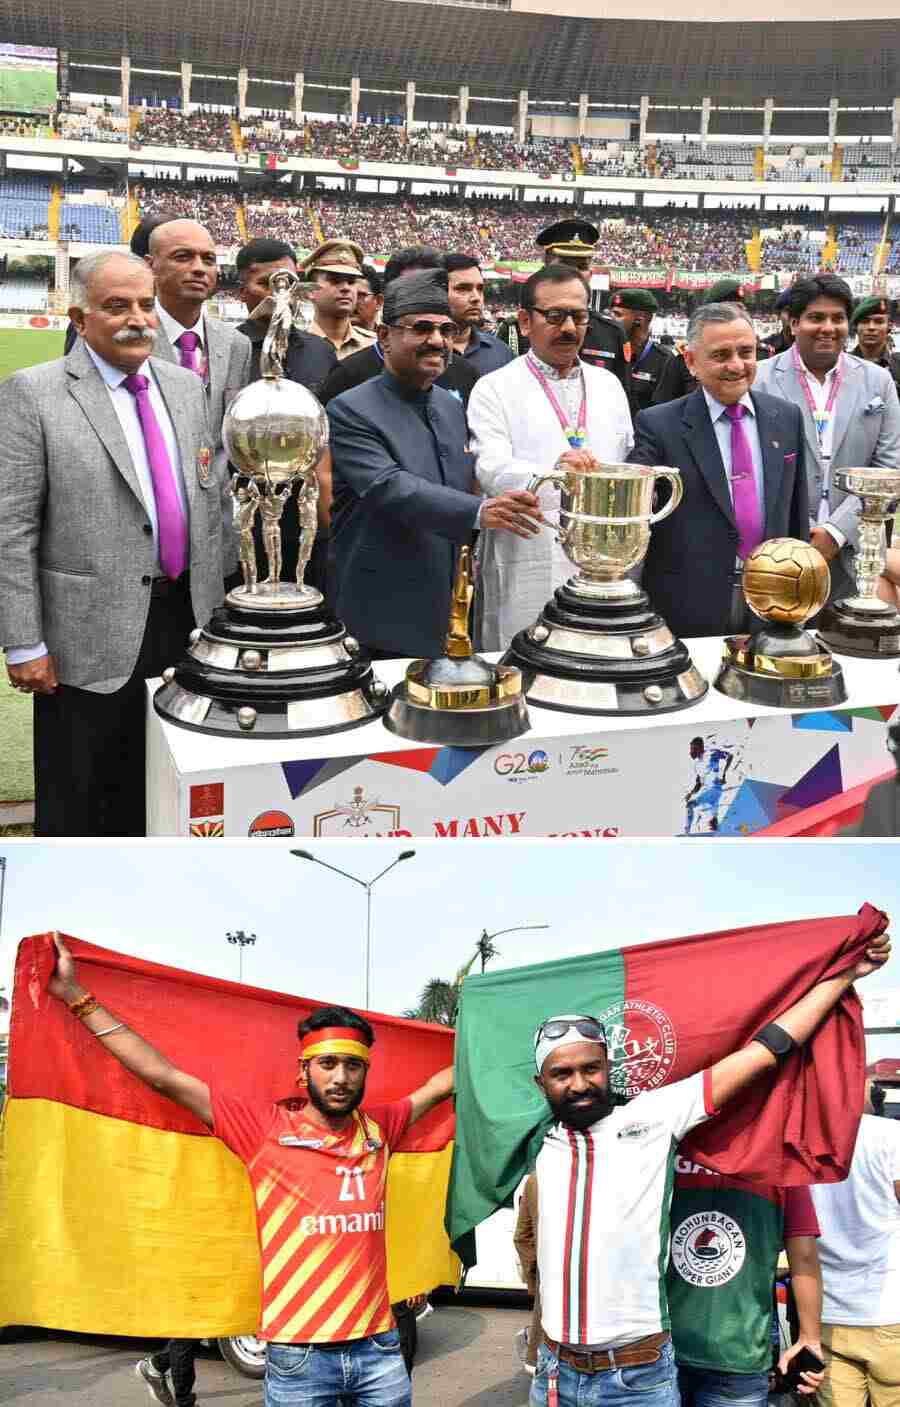 The much anticipated Durand Cup final match began on Sunday evening between arch-rivals East Bengal and Mohun Bagan at Yuva Bharati Krirangan in Salt Lake. The spirit was high among the supporters of the two teams. Governor CV Ananda Bose and sports minister Aroop Biswas were present. All streets led to the stadium. Nothing else mattered. Bikes, taxis, Metro rakes, local trains — all modes of transport bound for the stadium were jam-packed with football lovers 